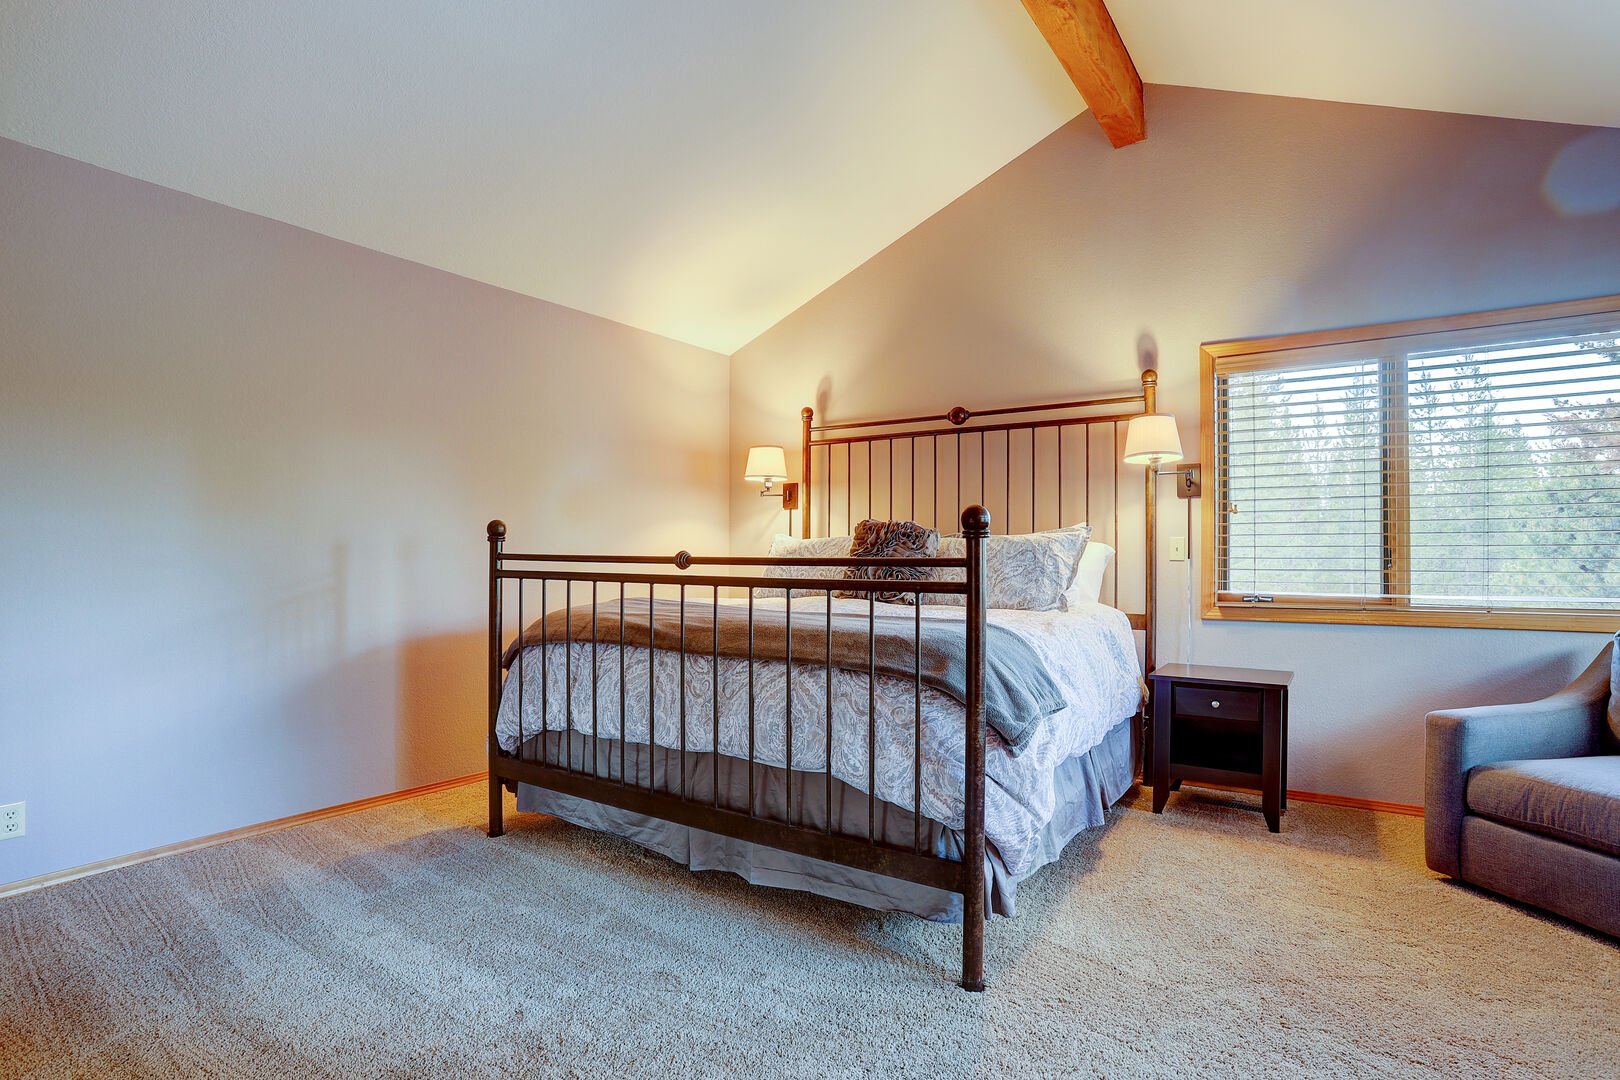 The large, secluded Master Suite occupies the entire second floor for your own private getaway.